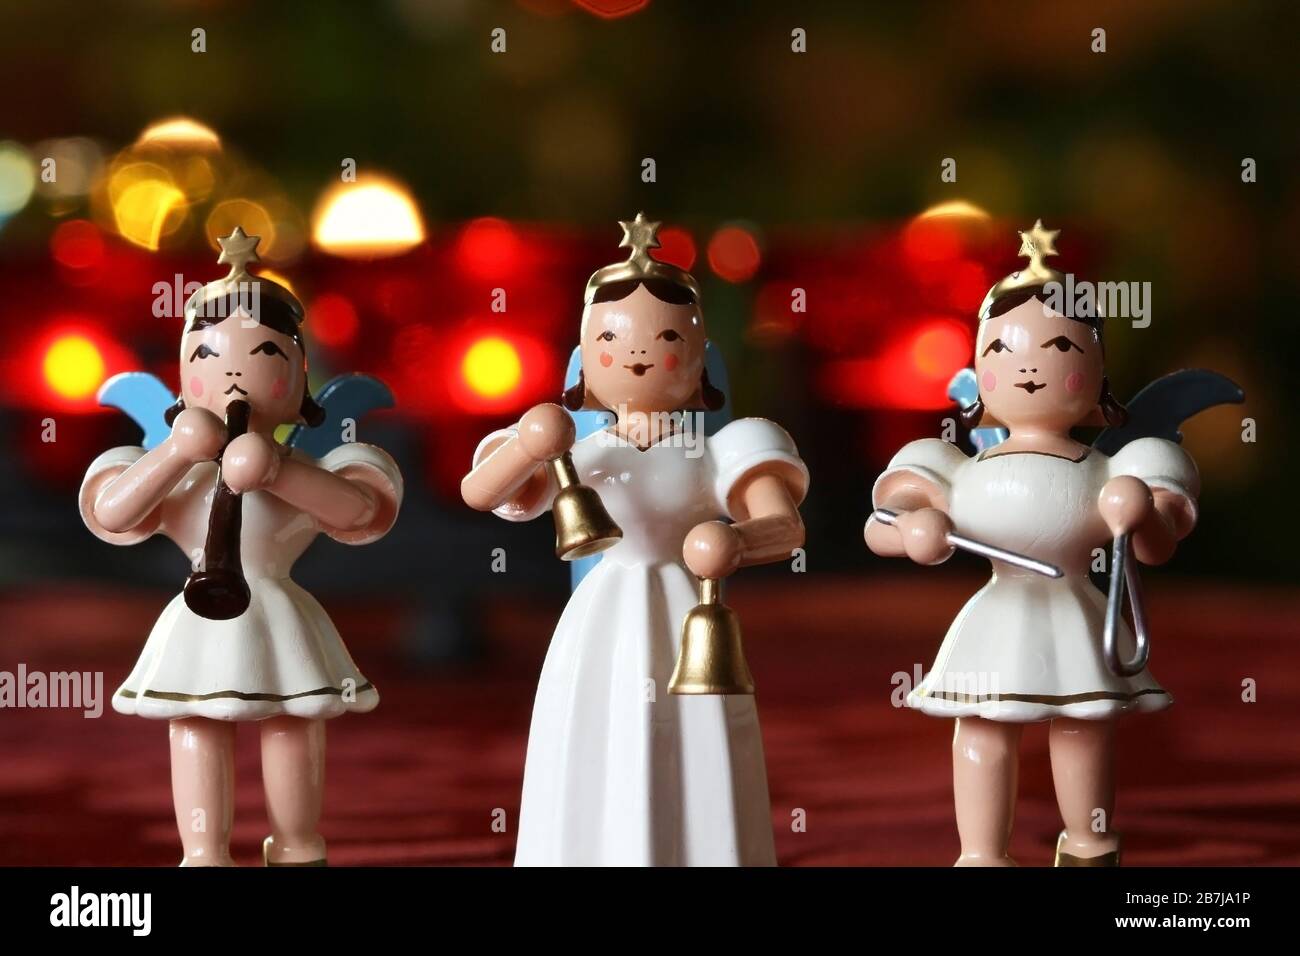 Advent Concert: three decoration angels making music in front of Advent wreath lights Stock Photo